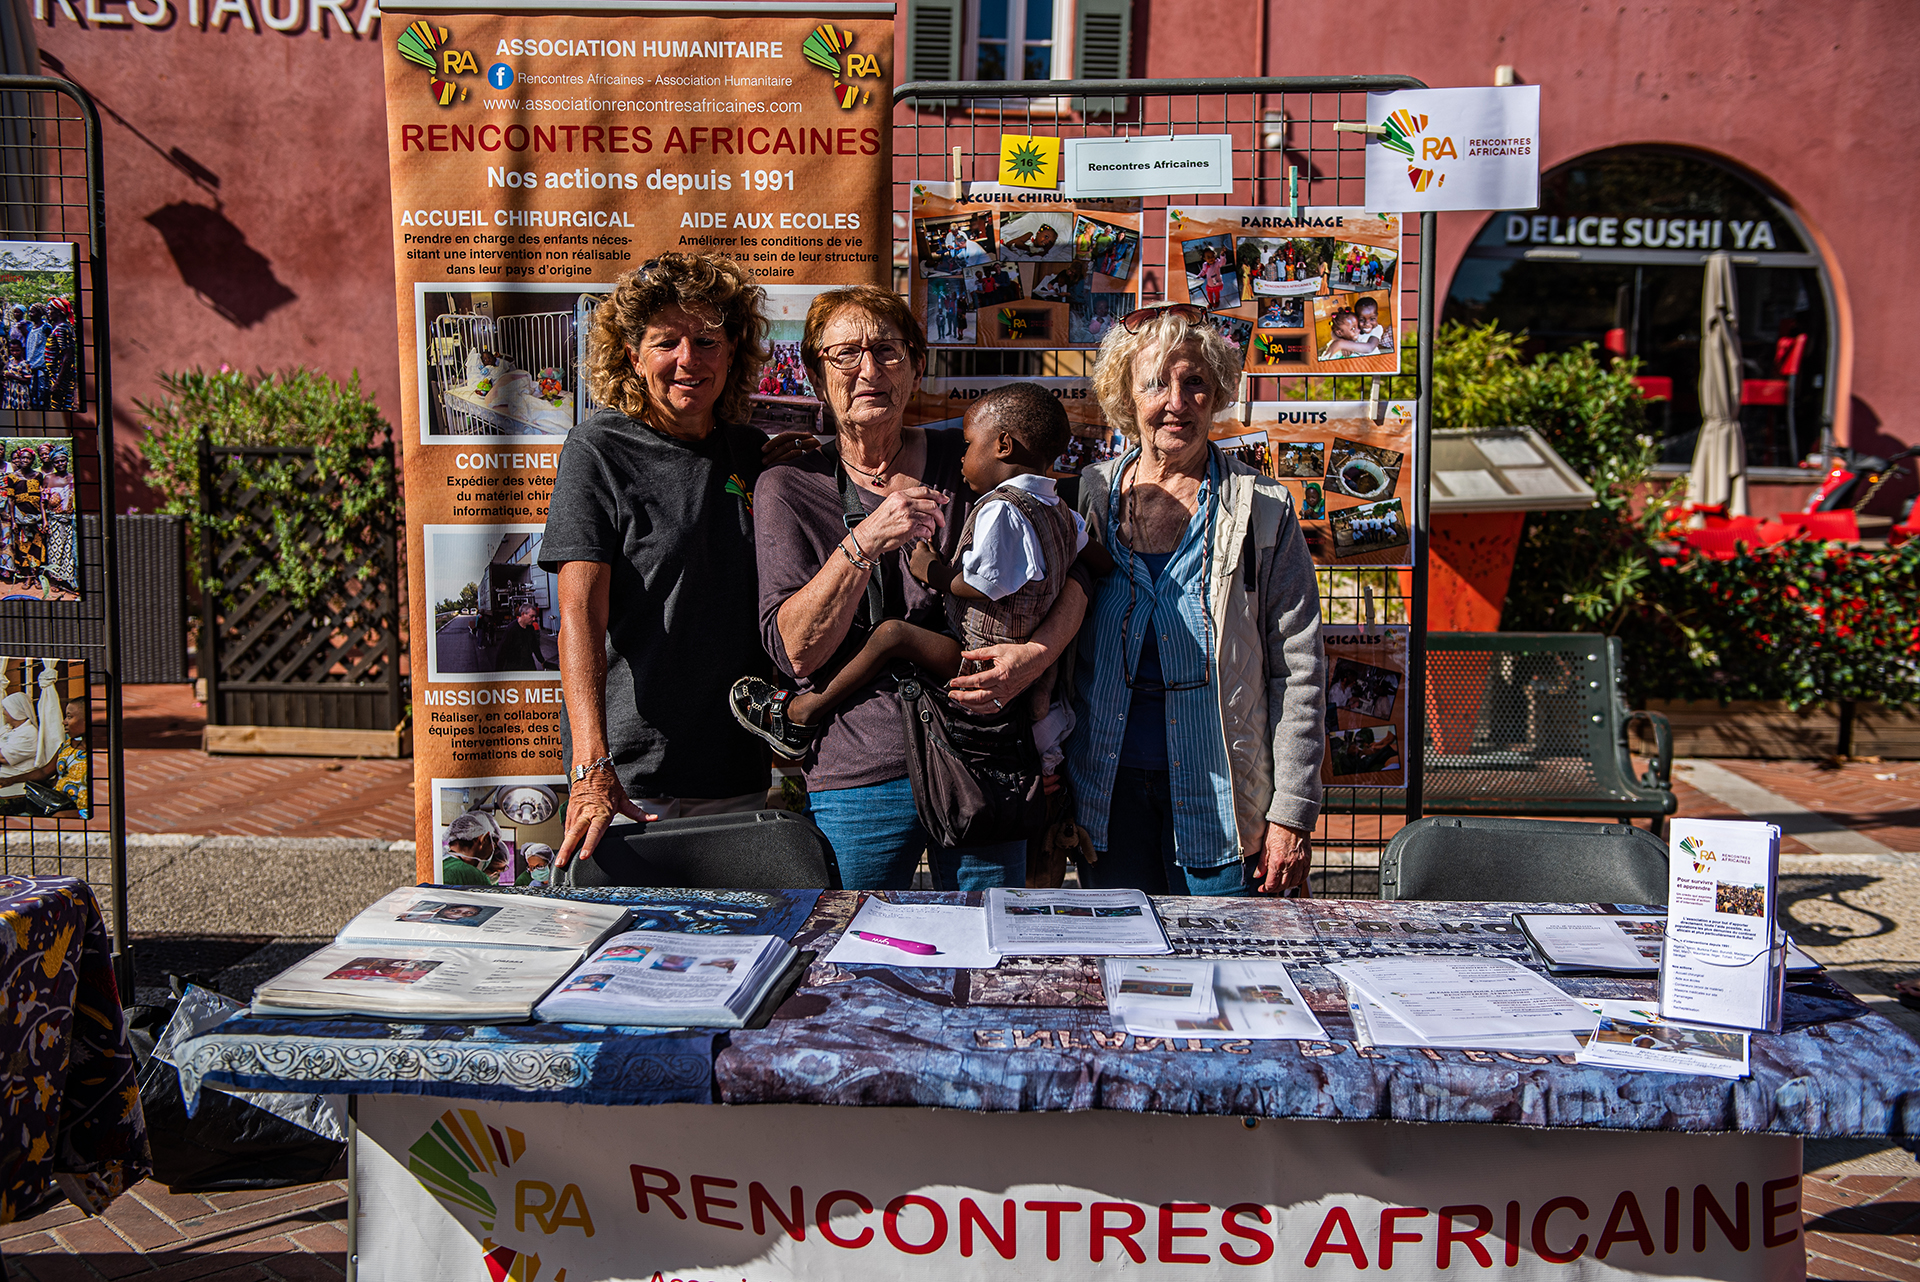 Association Humanitaire Rencontre Africaine